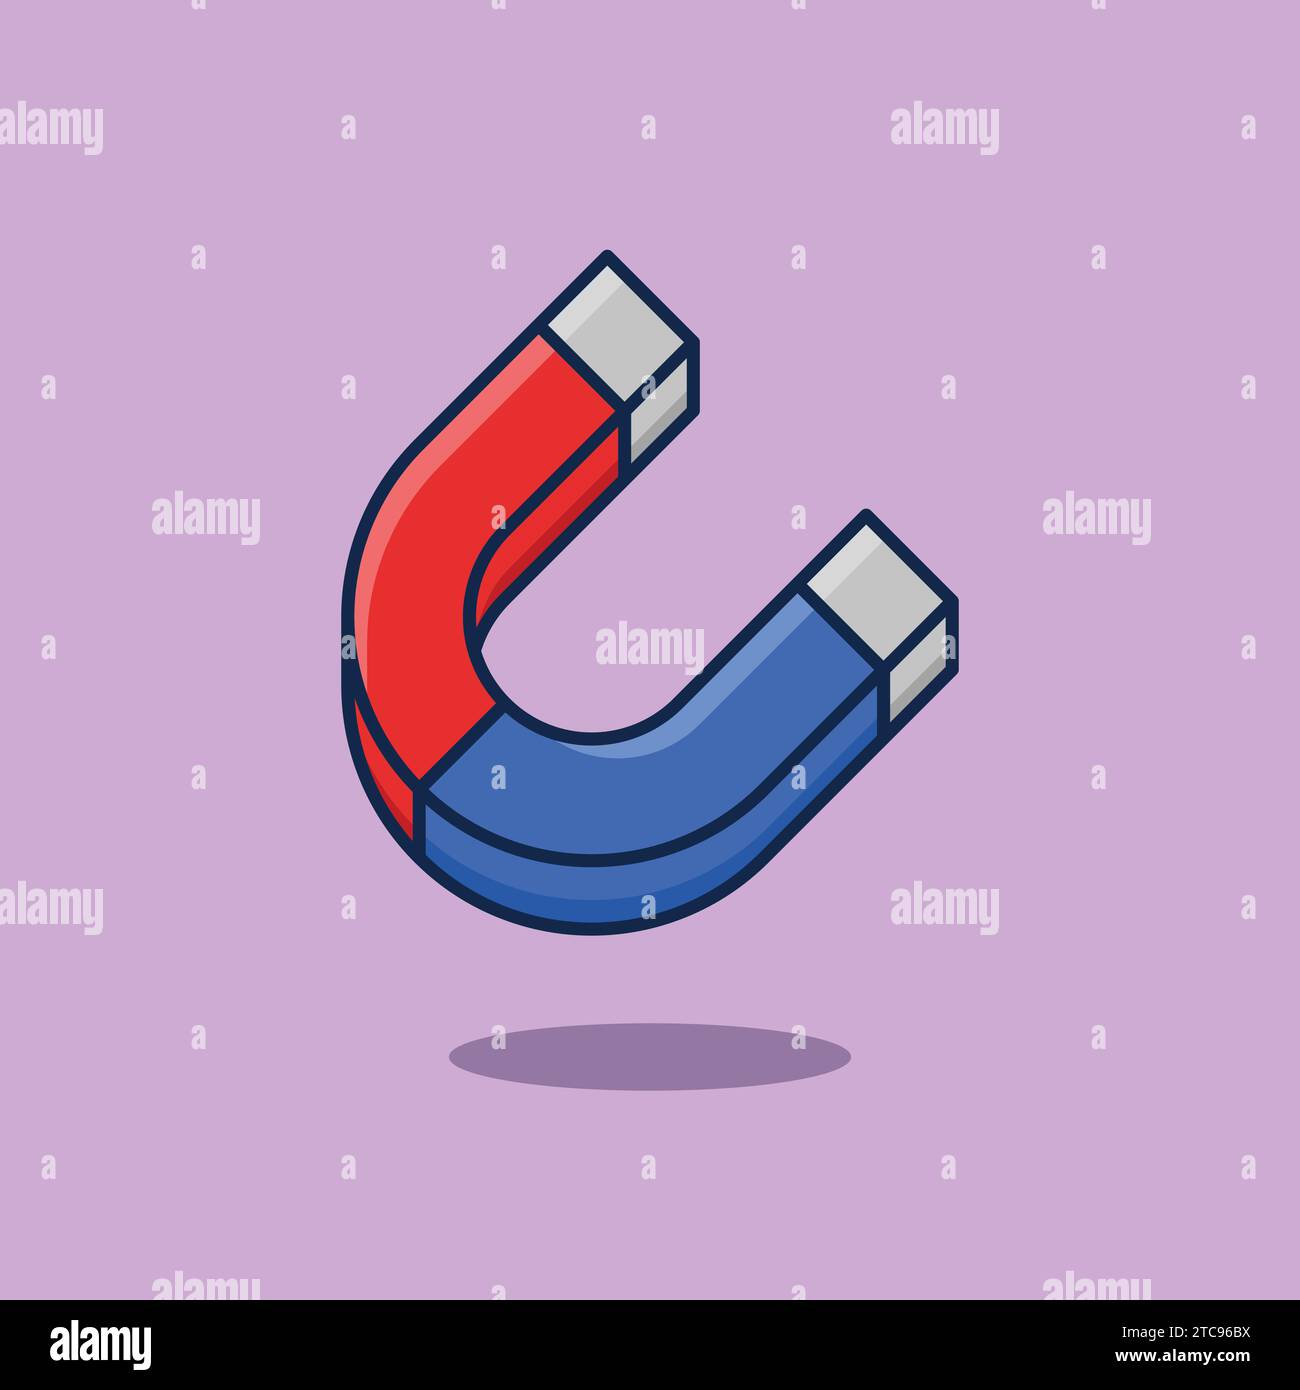 Magnet Illustration Vector Icon with Red and Blue Poles Stock Vector